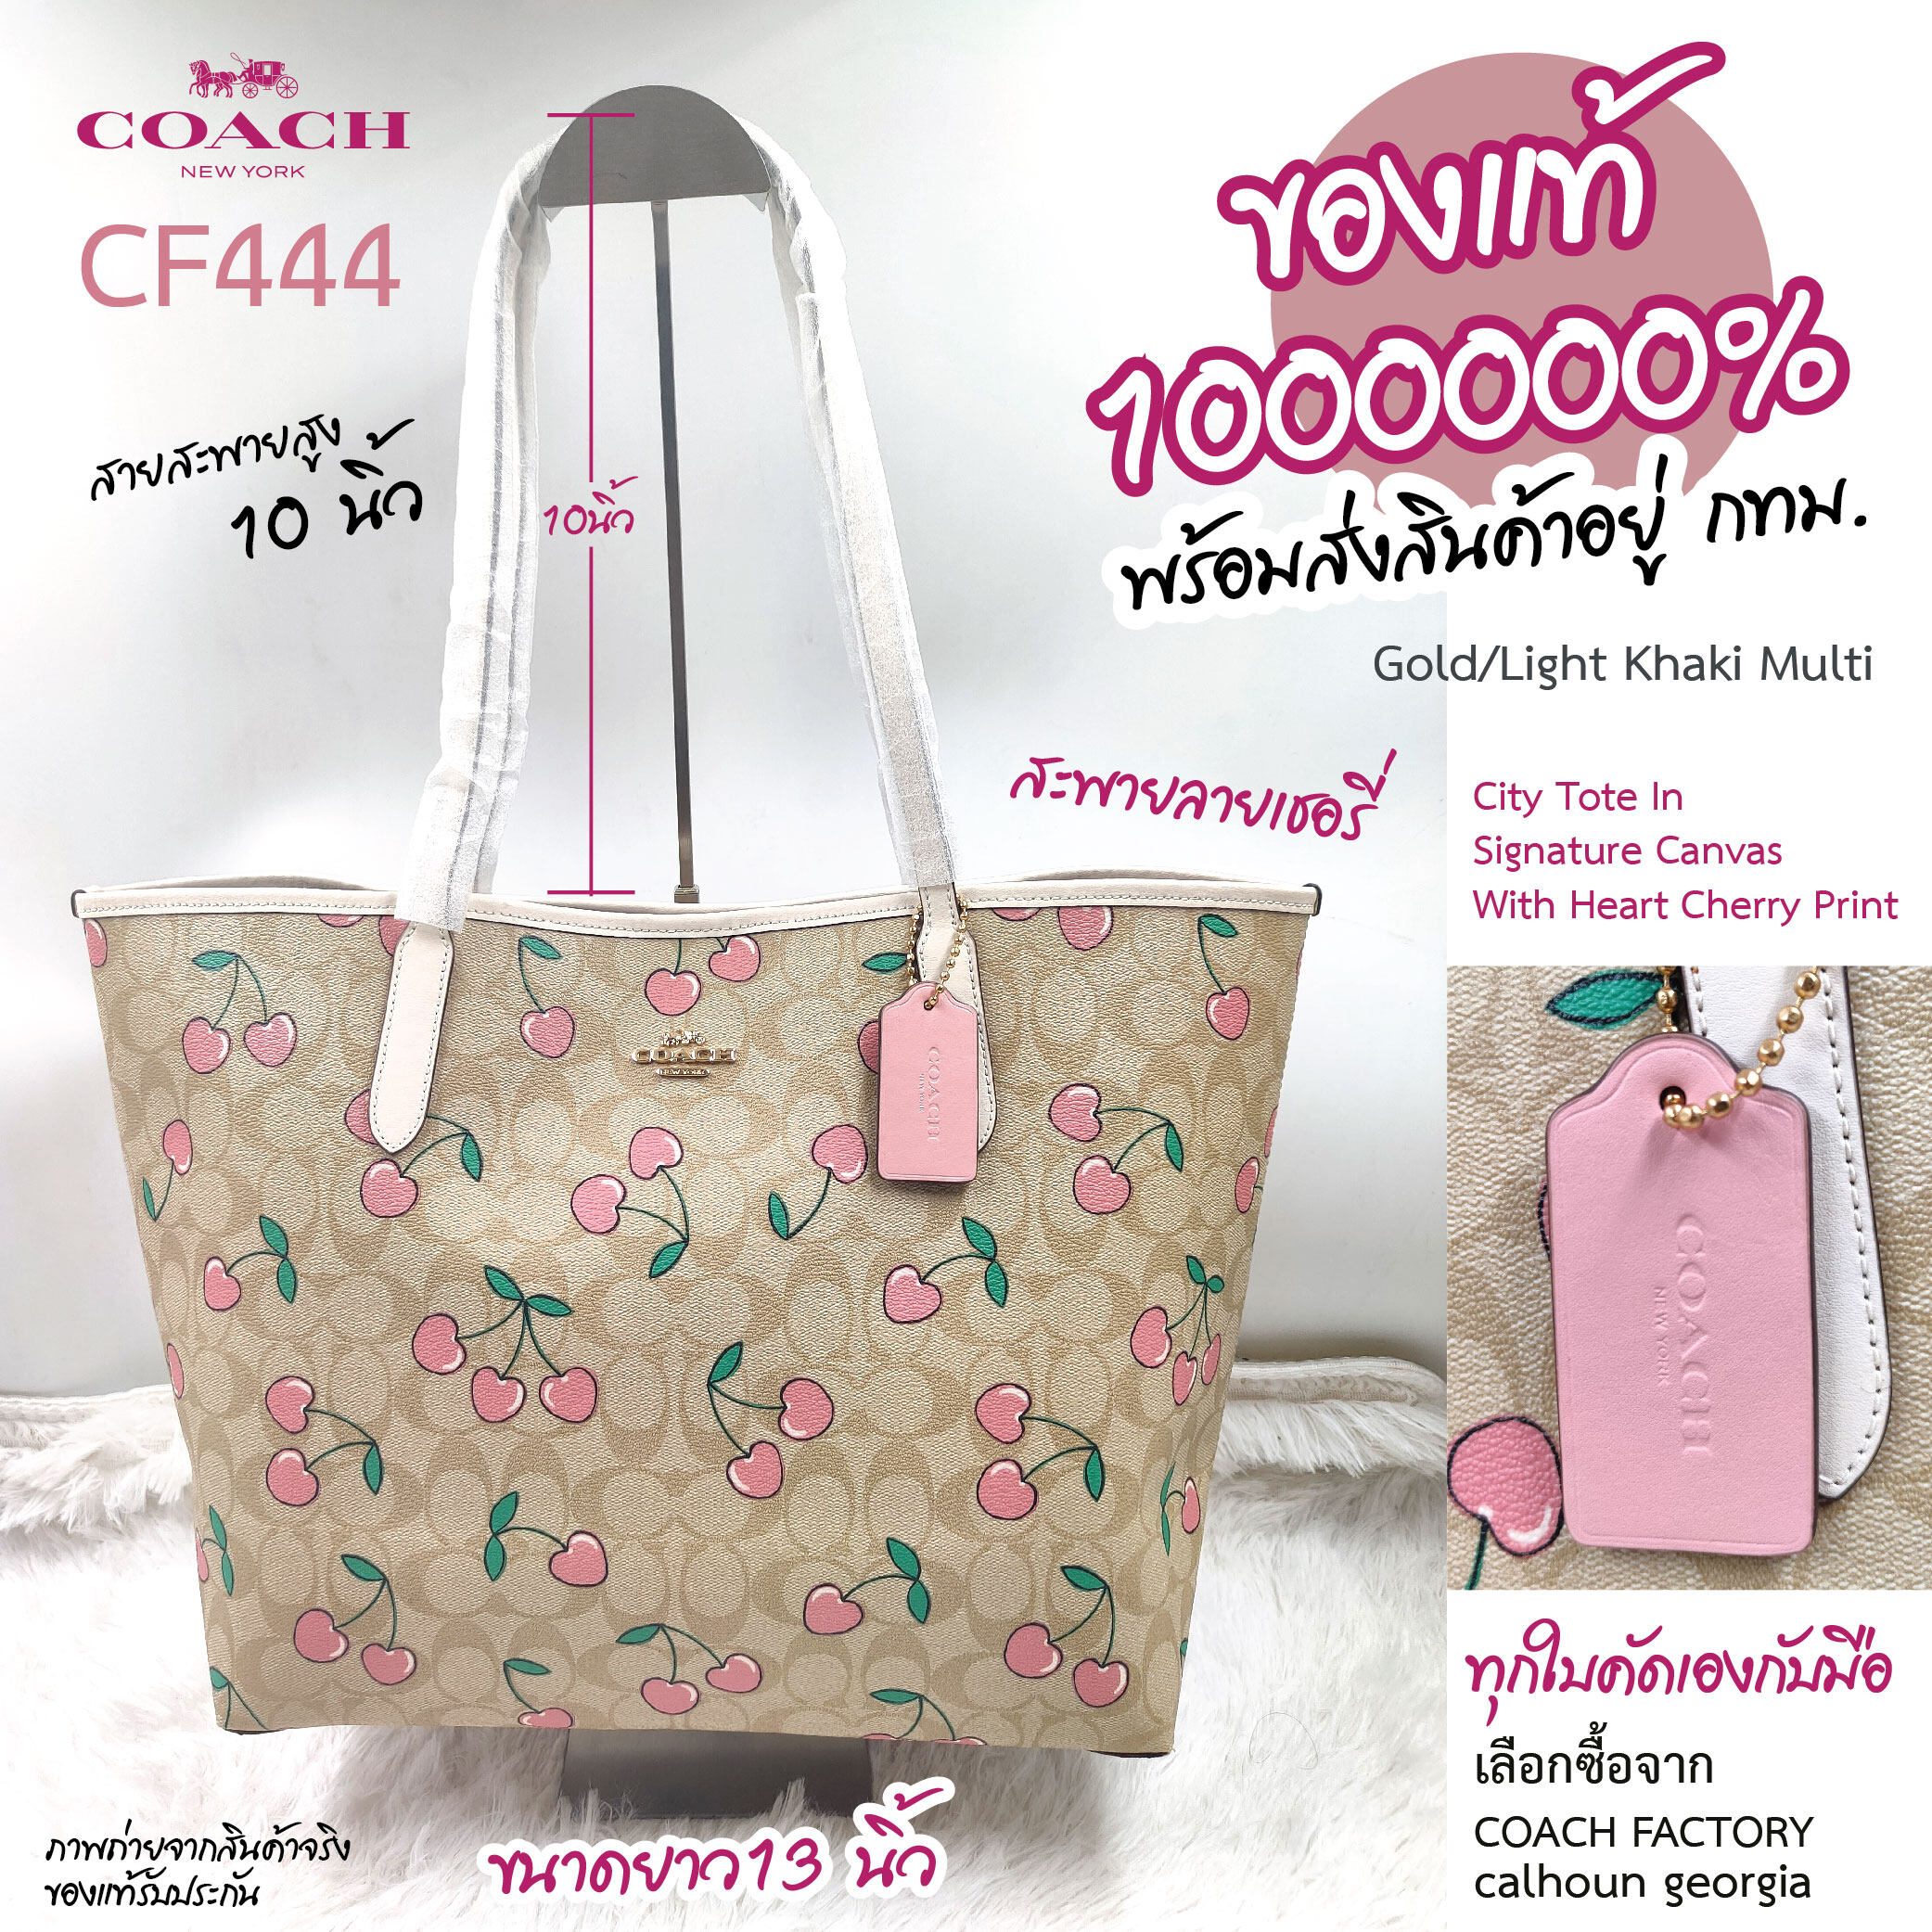 Coach CF444 City Tote In Signature Canvas With Heart Cherry Print